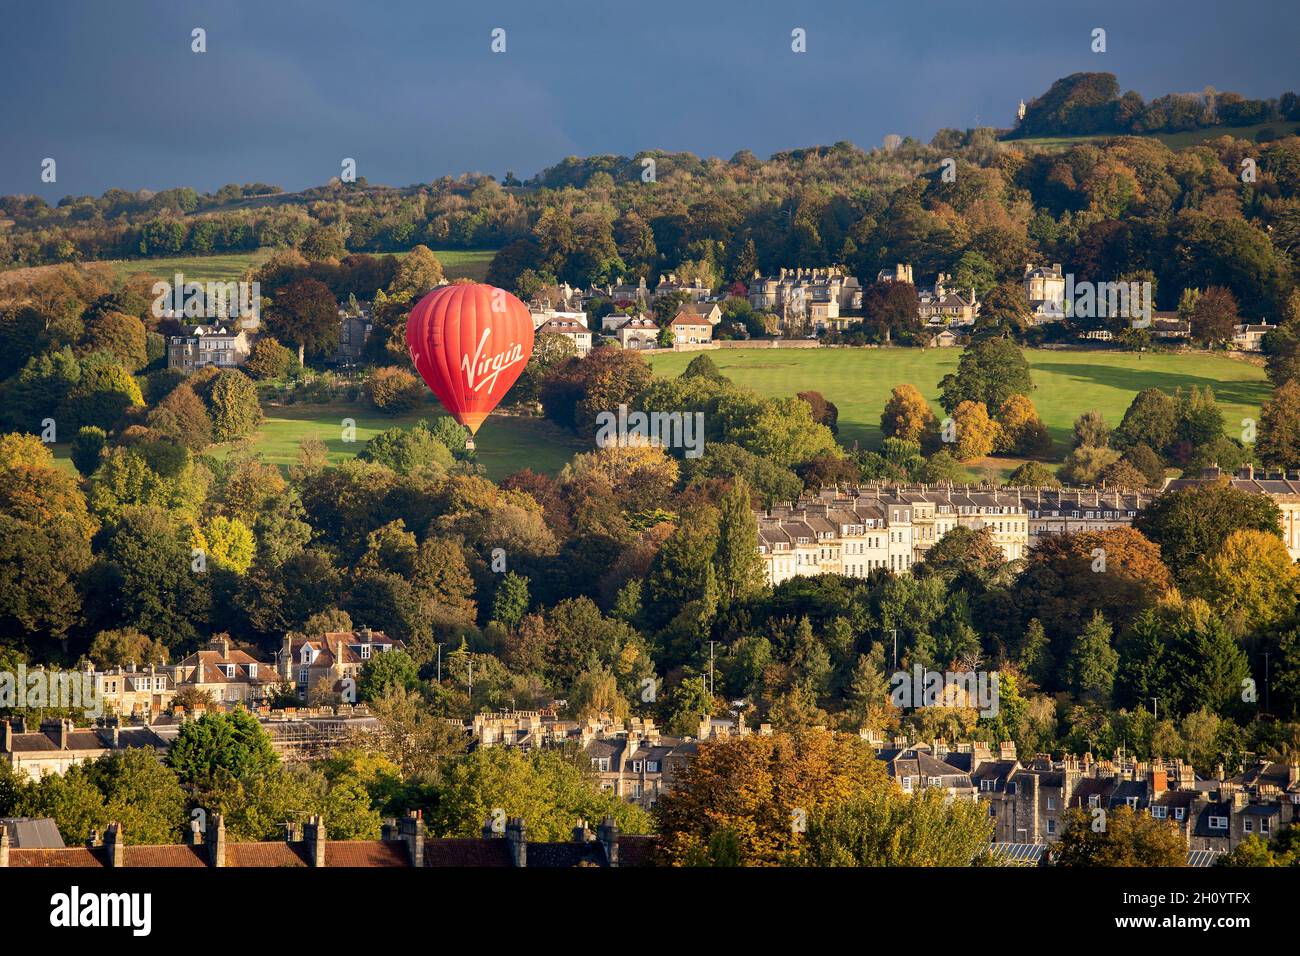 BATH, UK - OCTOBER 14, 2021 : A red Virgin branded hot air balloon takes off from Royal Victoria Park on a sunny autumnal morning. Stock Photo